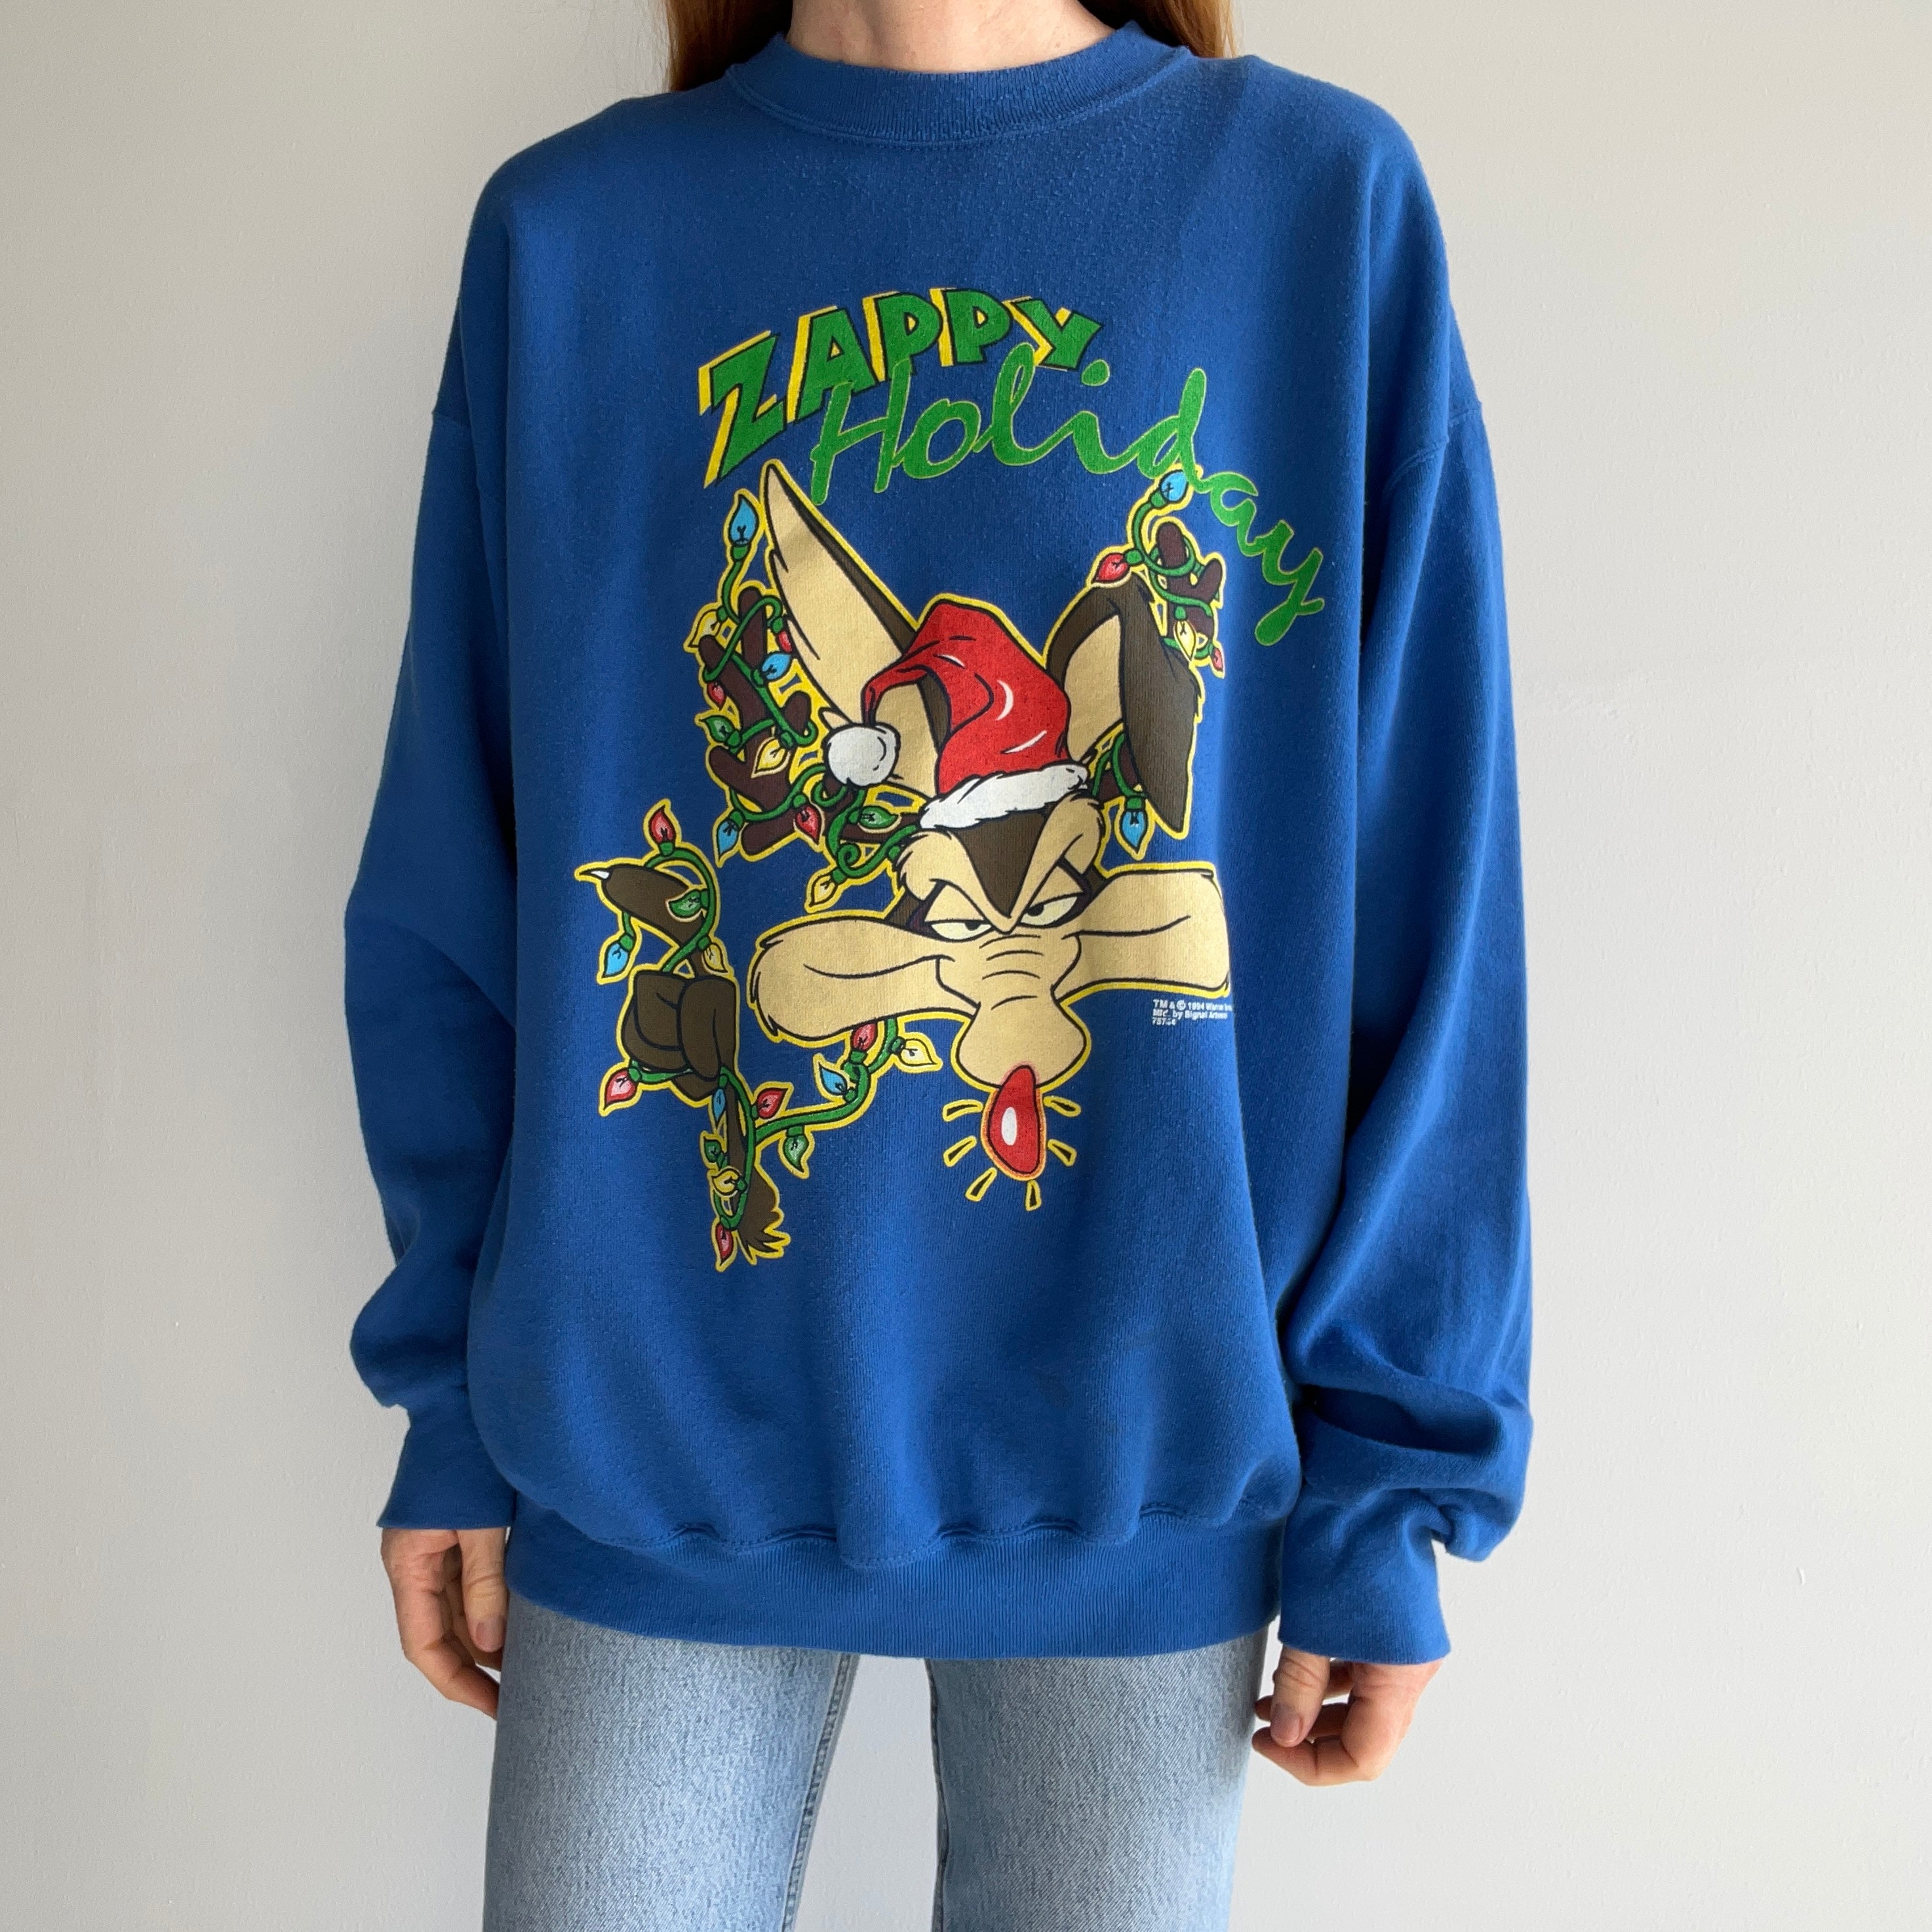 1994 Zappy Holidays by Wile E Coyote